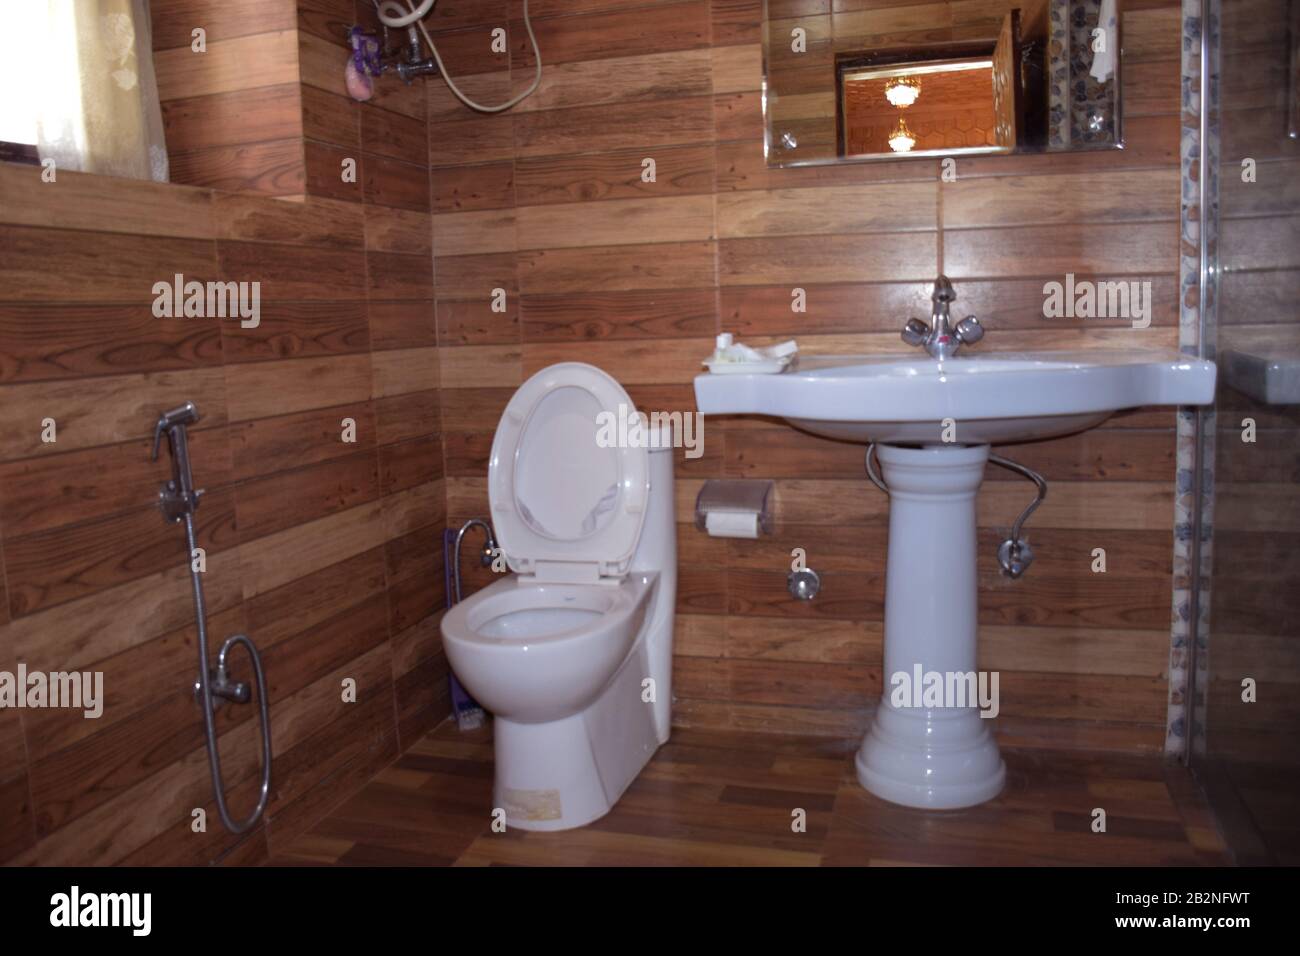 View of a hotel washroom or loo of an Indian hotel Stock Photo